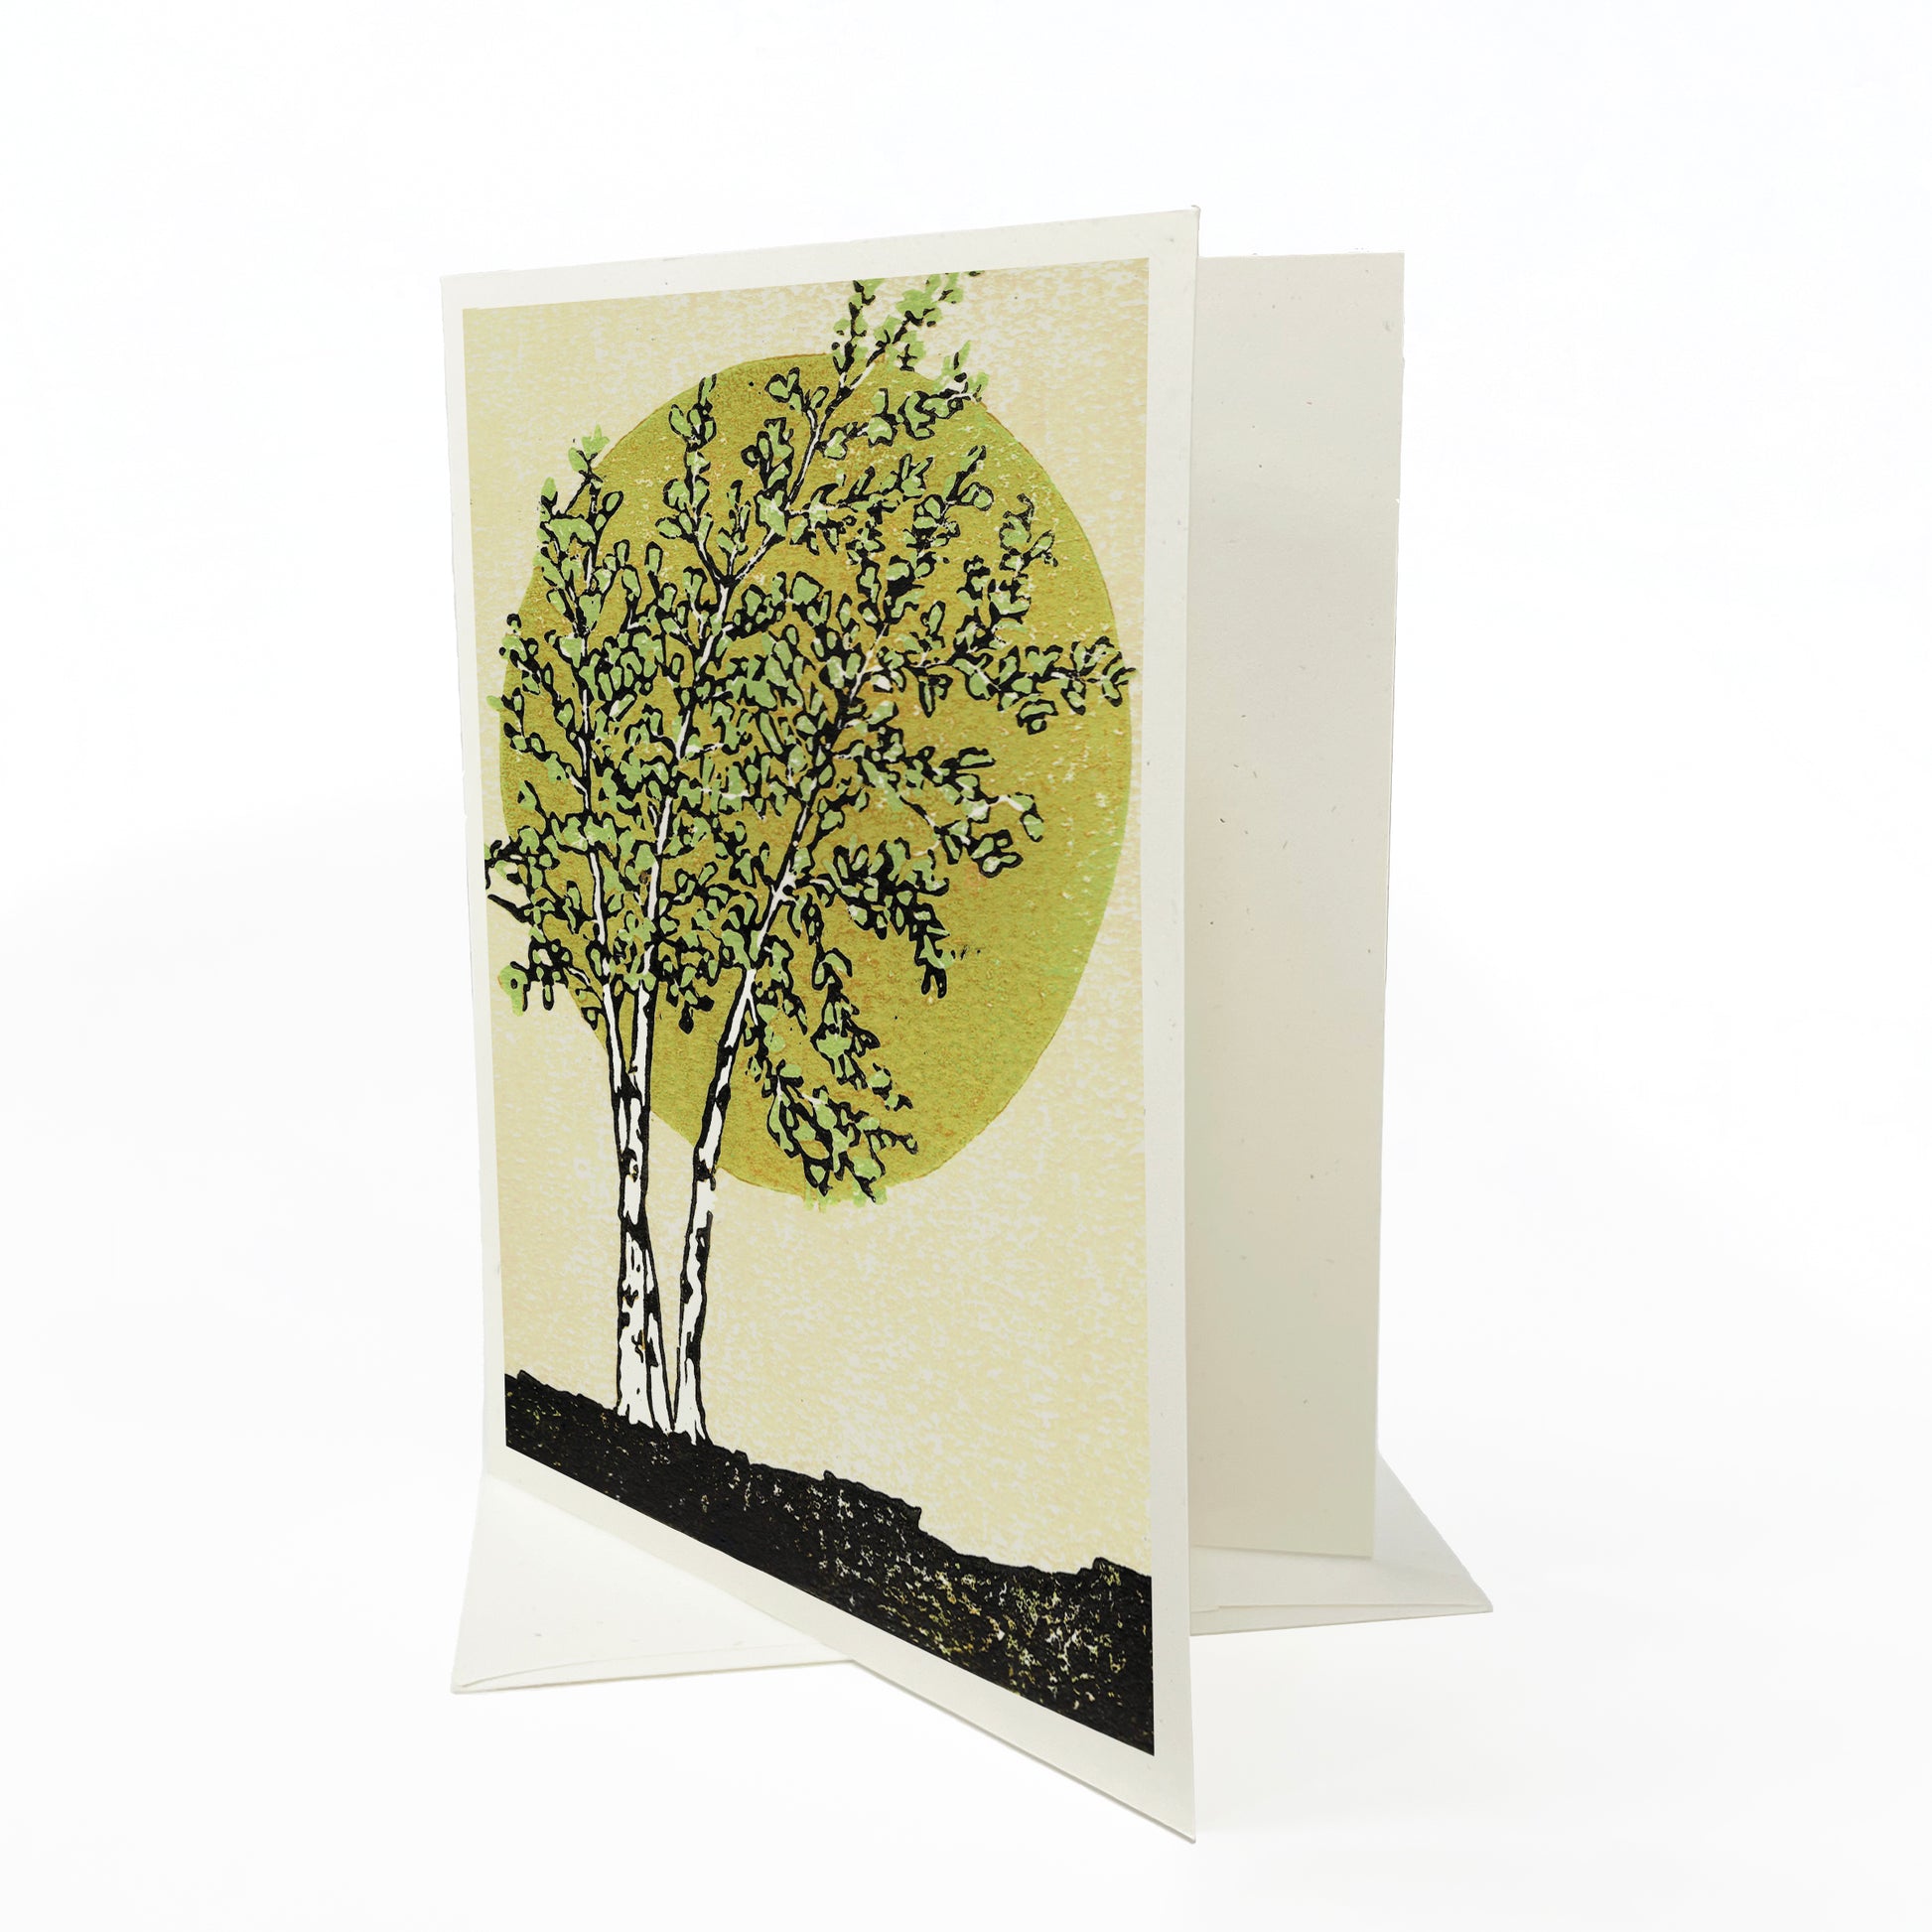 Radiant Birches.  A casually elegant card featuring a digital reproduction of Natalia Wohletz’s Peninsula Prints block print design with the same title.